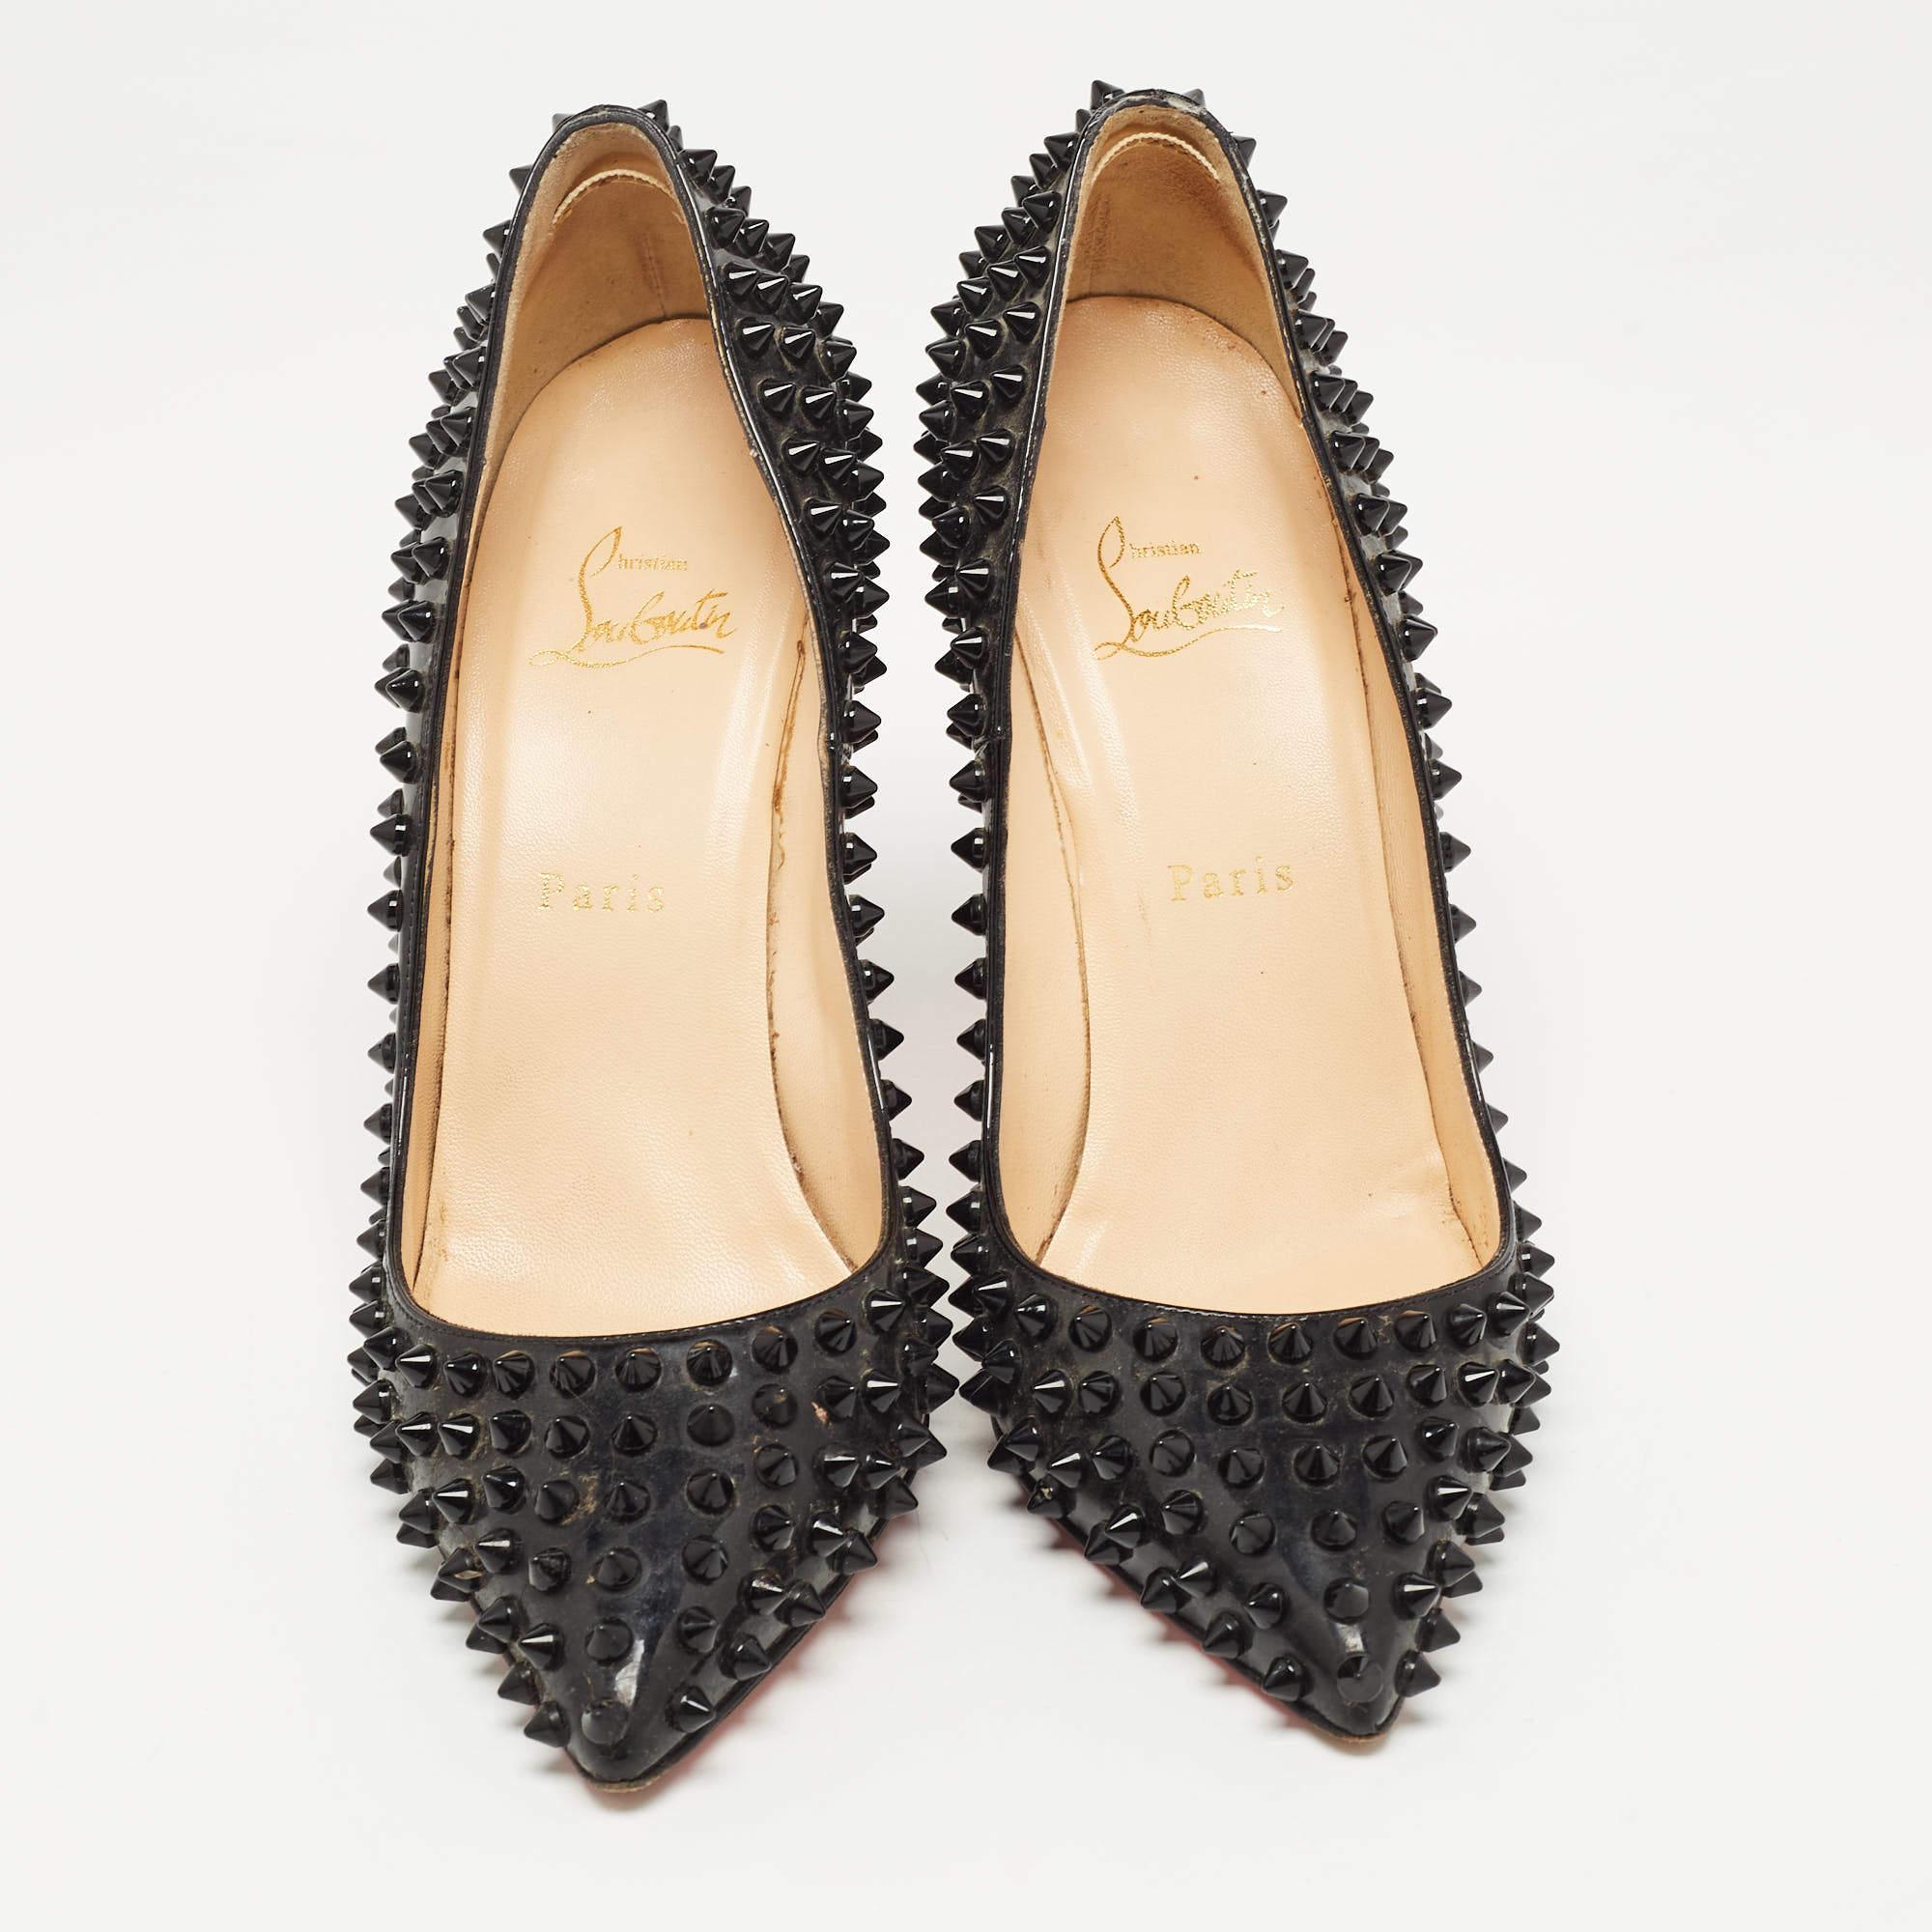 Crafted in a classy hue, we love these Christian Louboutin pumps. Designed to make a statement, they have a sleek silhouette and a nice fit. Wear yours under maxi skirts for a peek of glamour, or let them shine with cropped hemlines.

